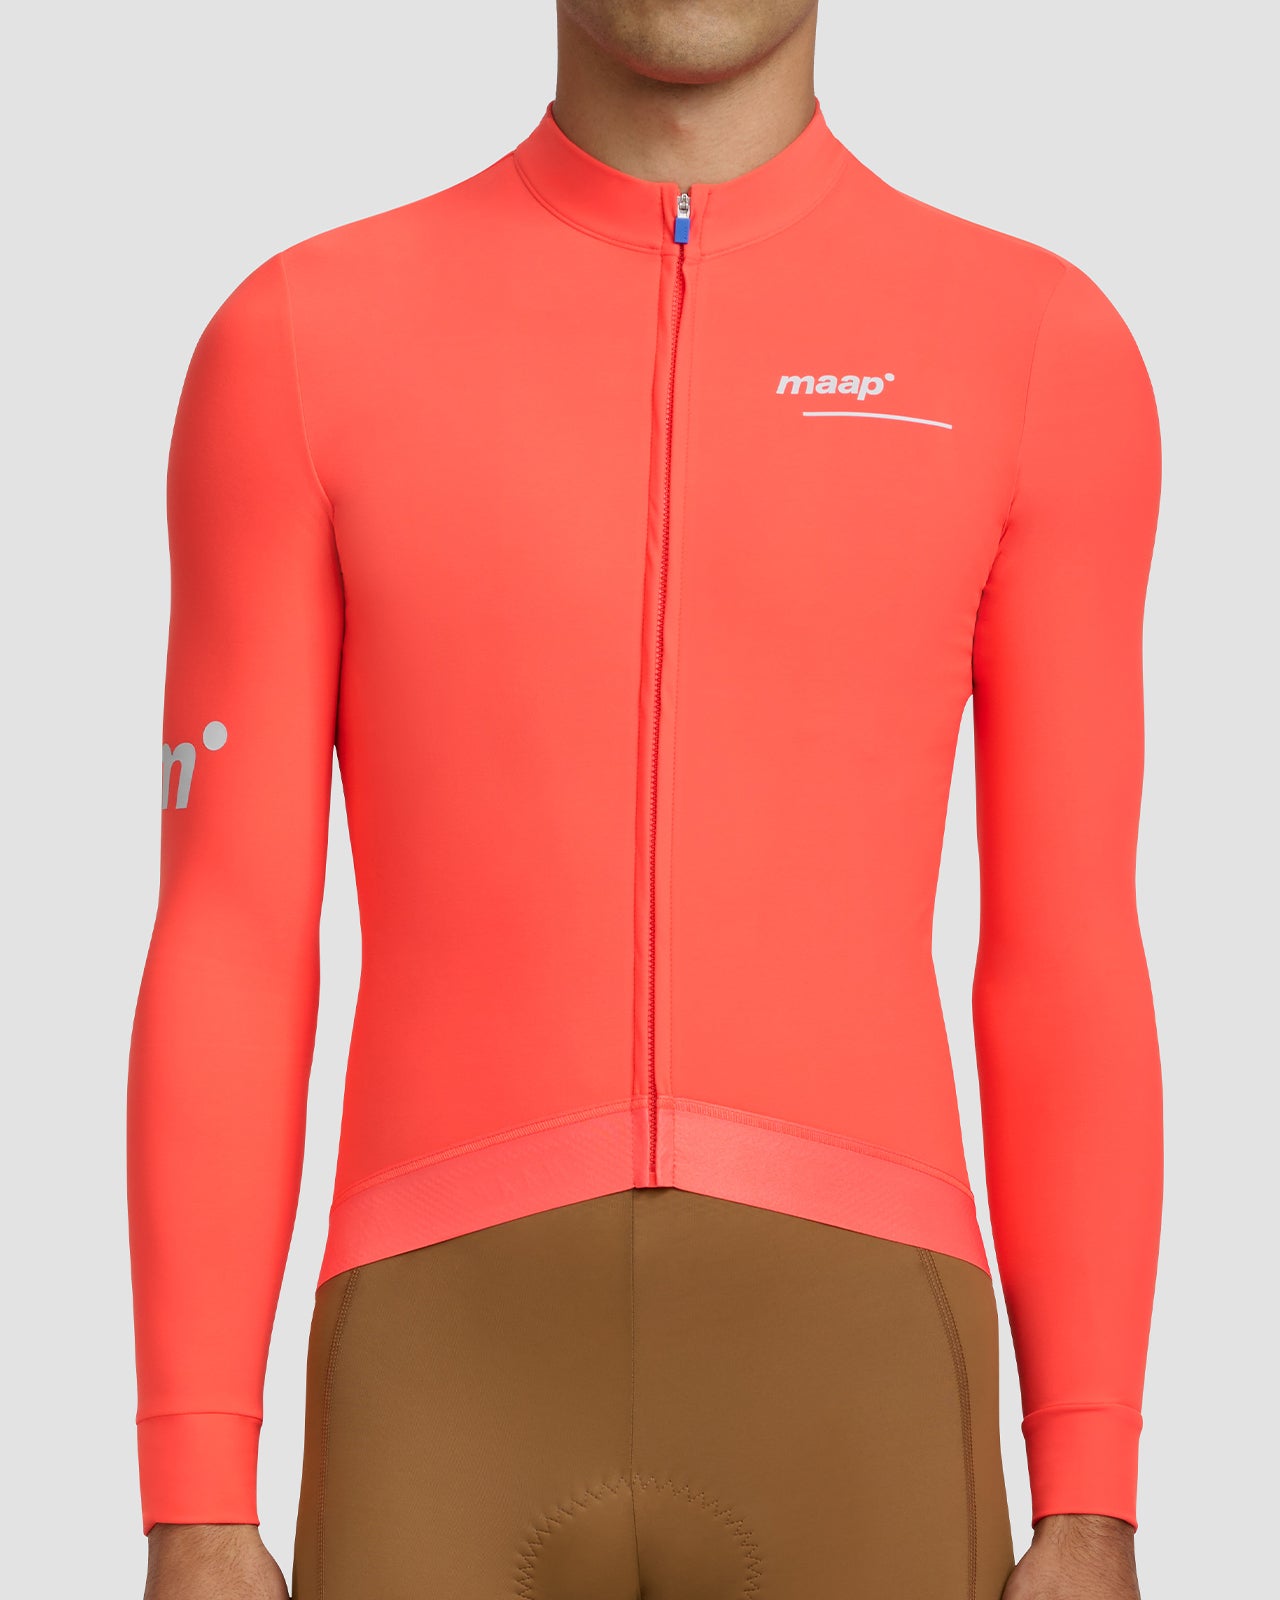 Thermal Training LS Jersey | MAAP US